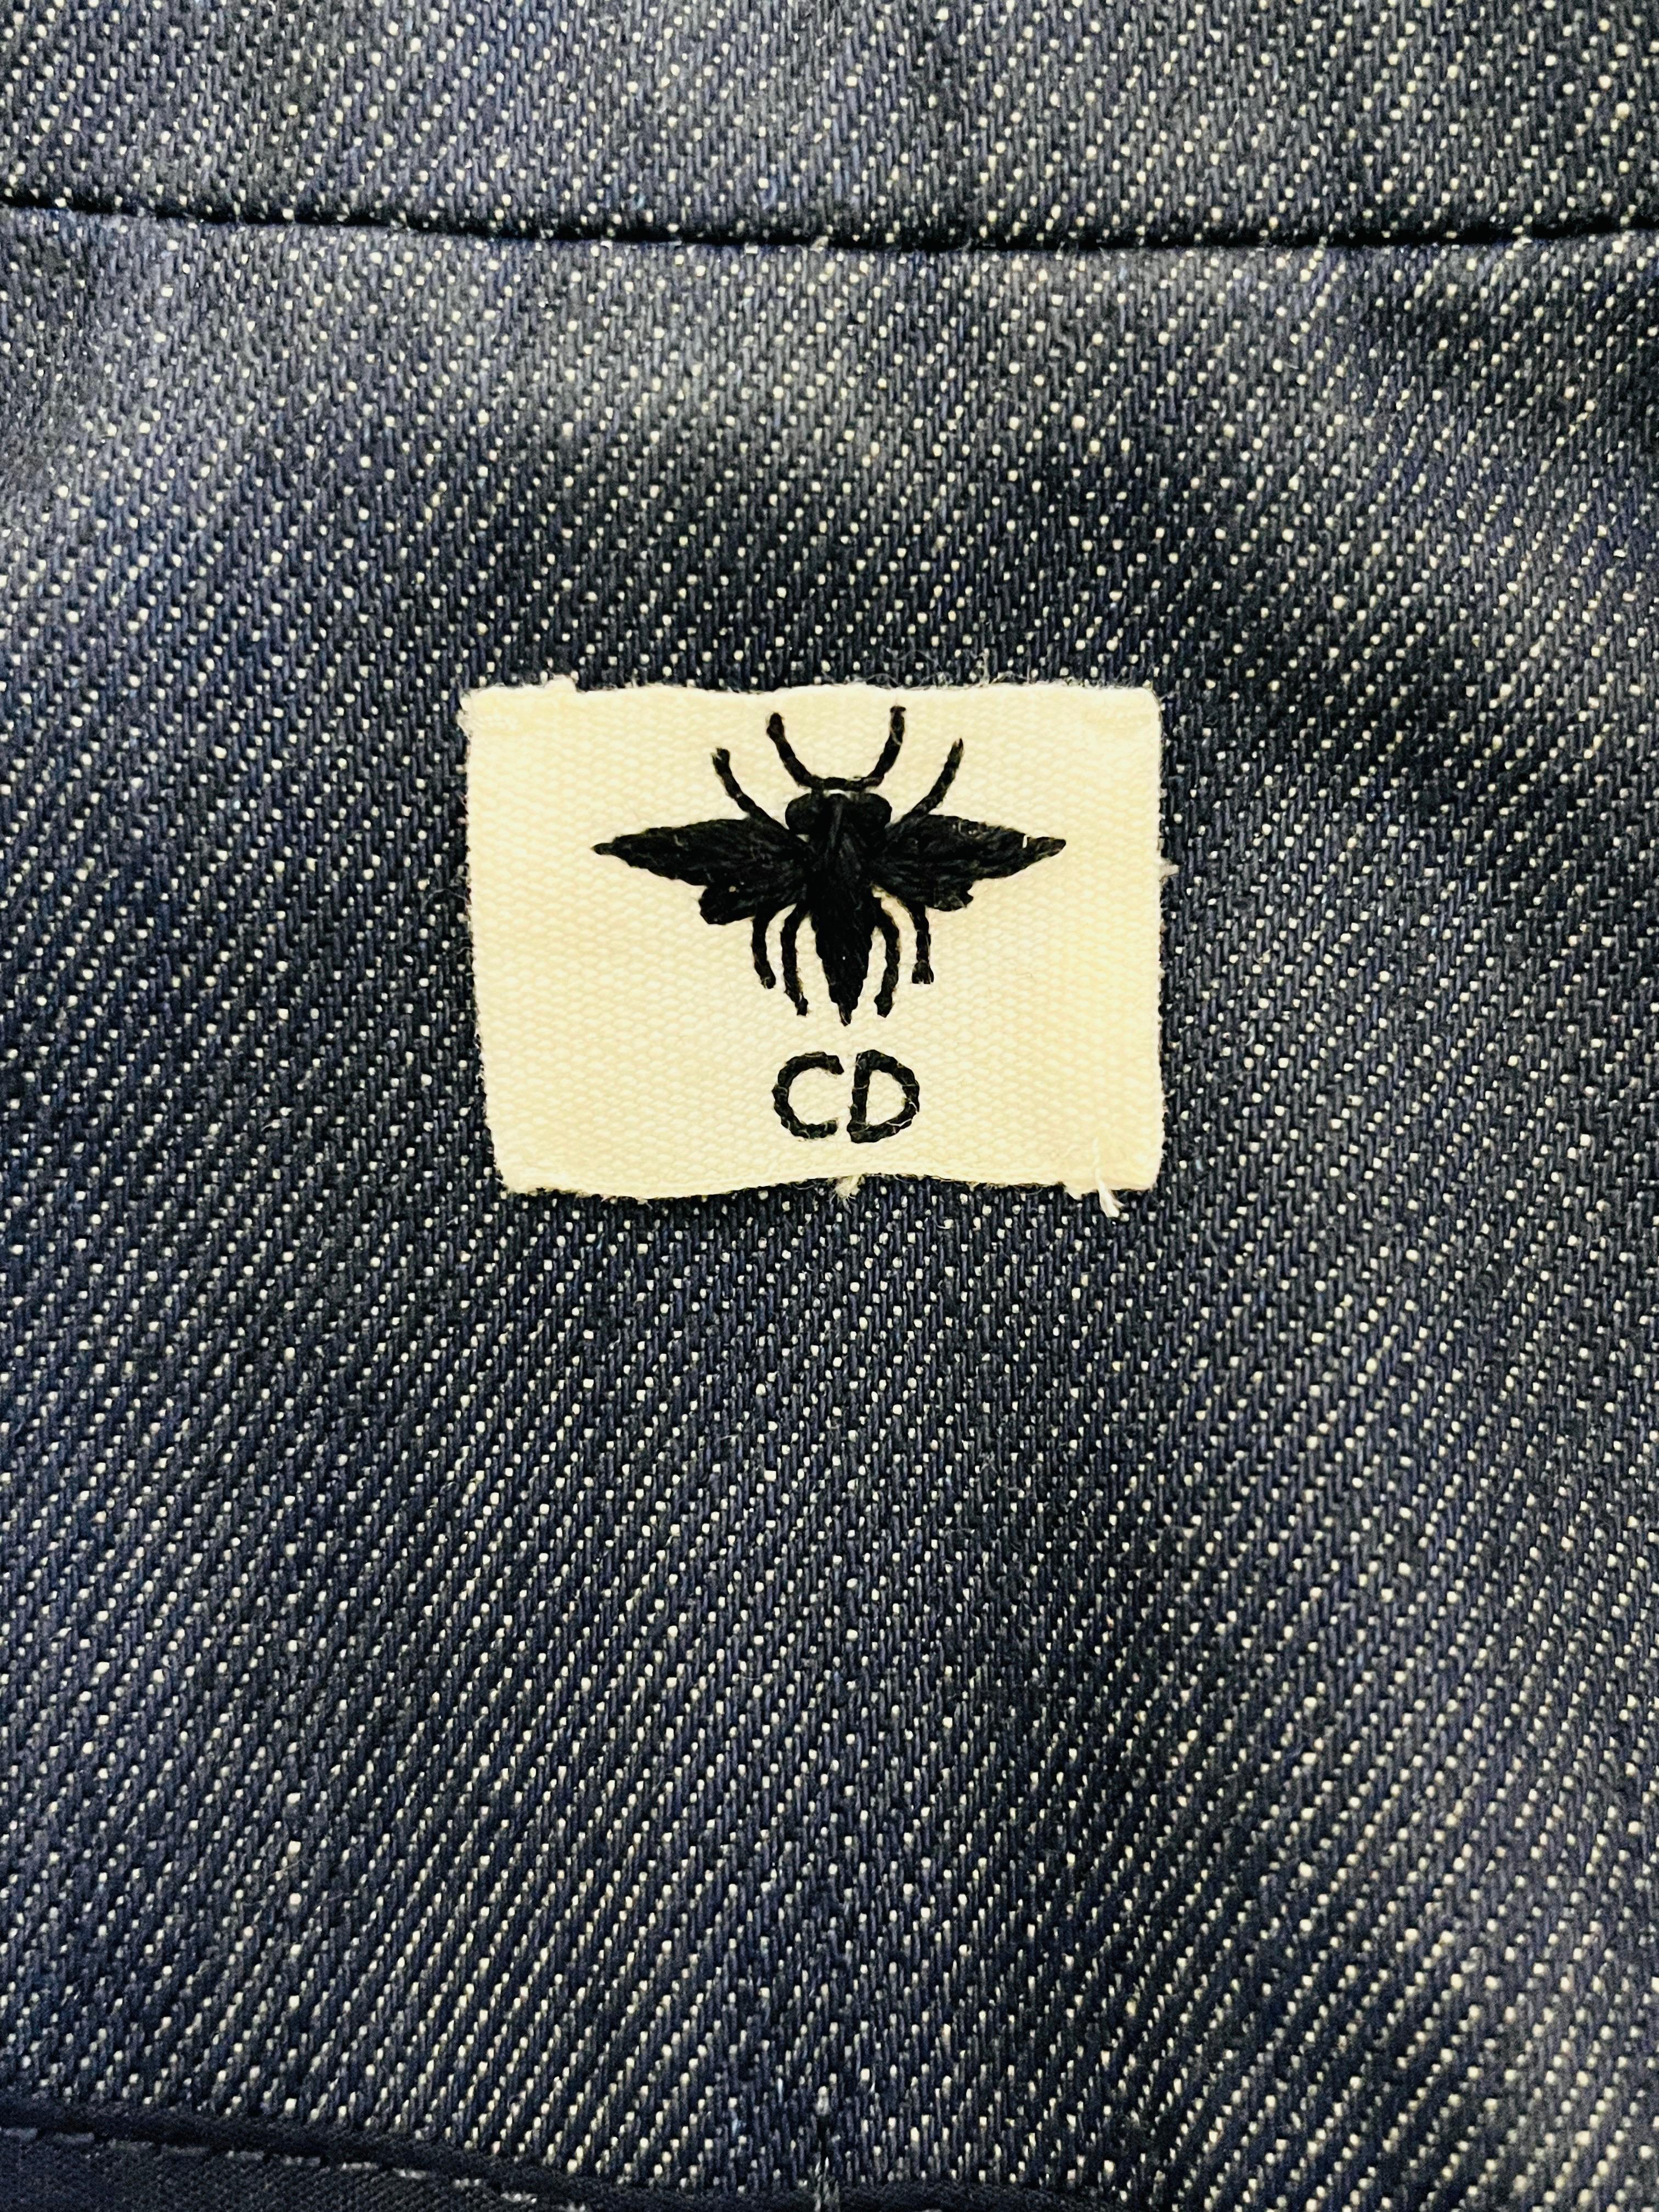 Christian Dior Denim Bar Jacket With Bee Embroidery 3